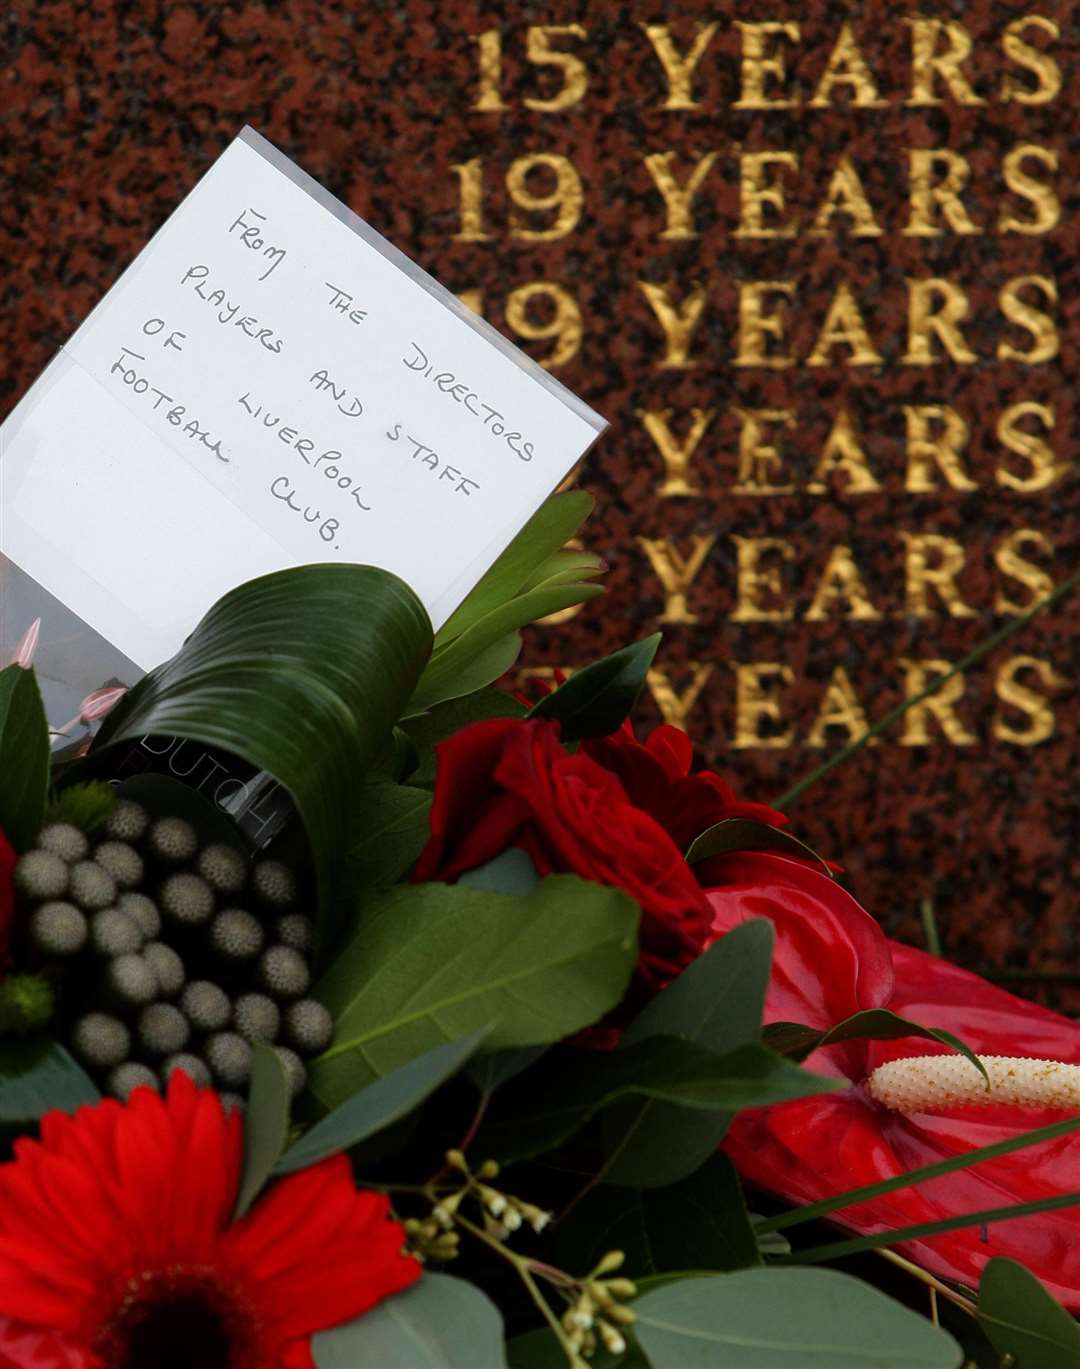 A floral tribute from Liverpool FC in front of the Hillsborough Memorial before a memorial service at Liverpool’s Anfield stadium (Dave Thompson/PA)